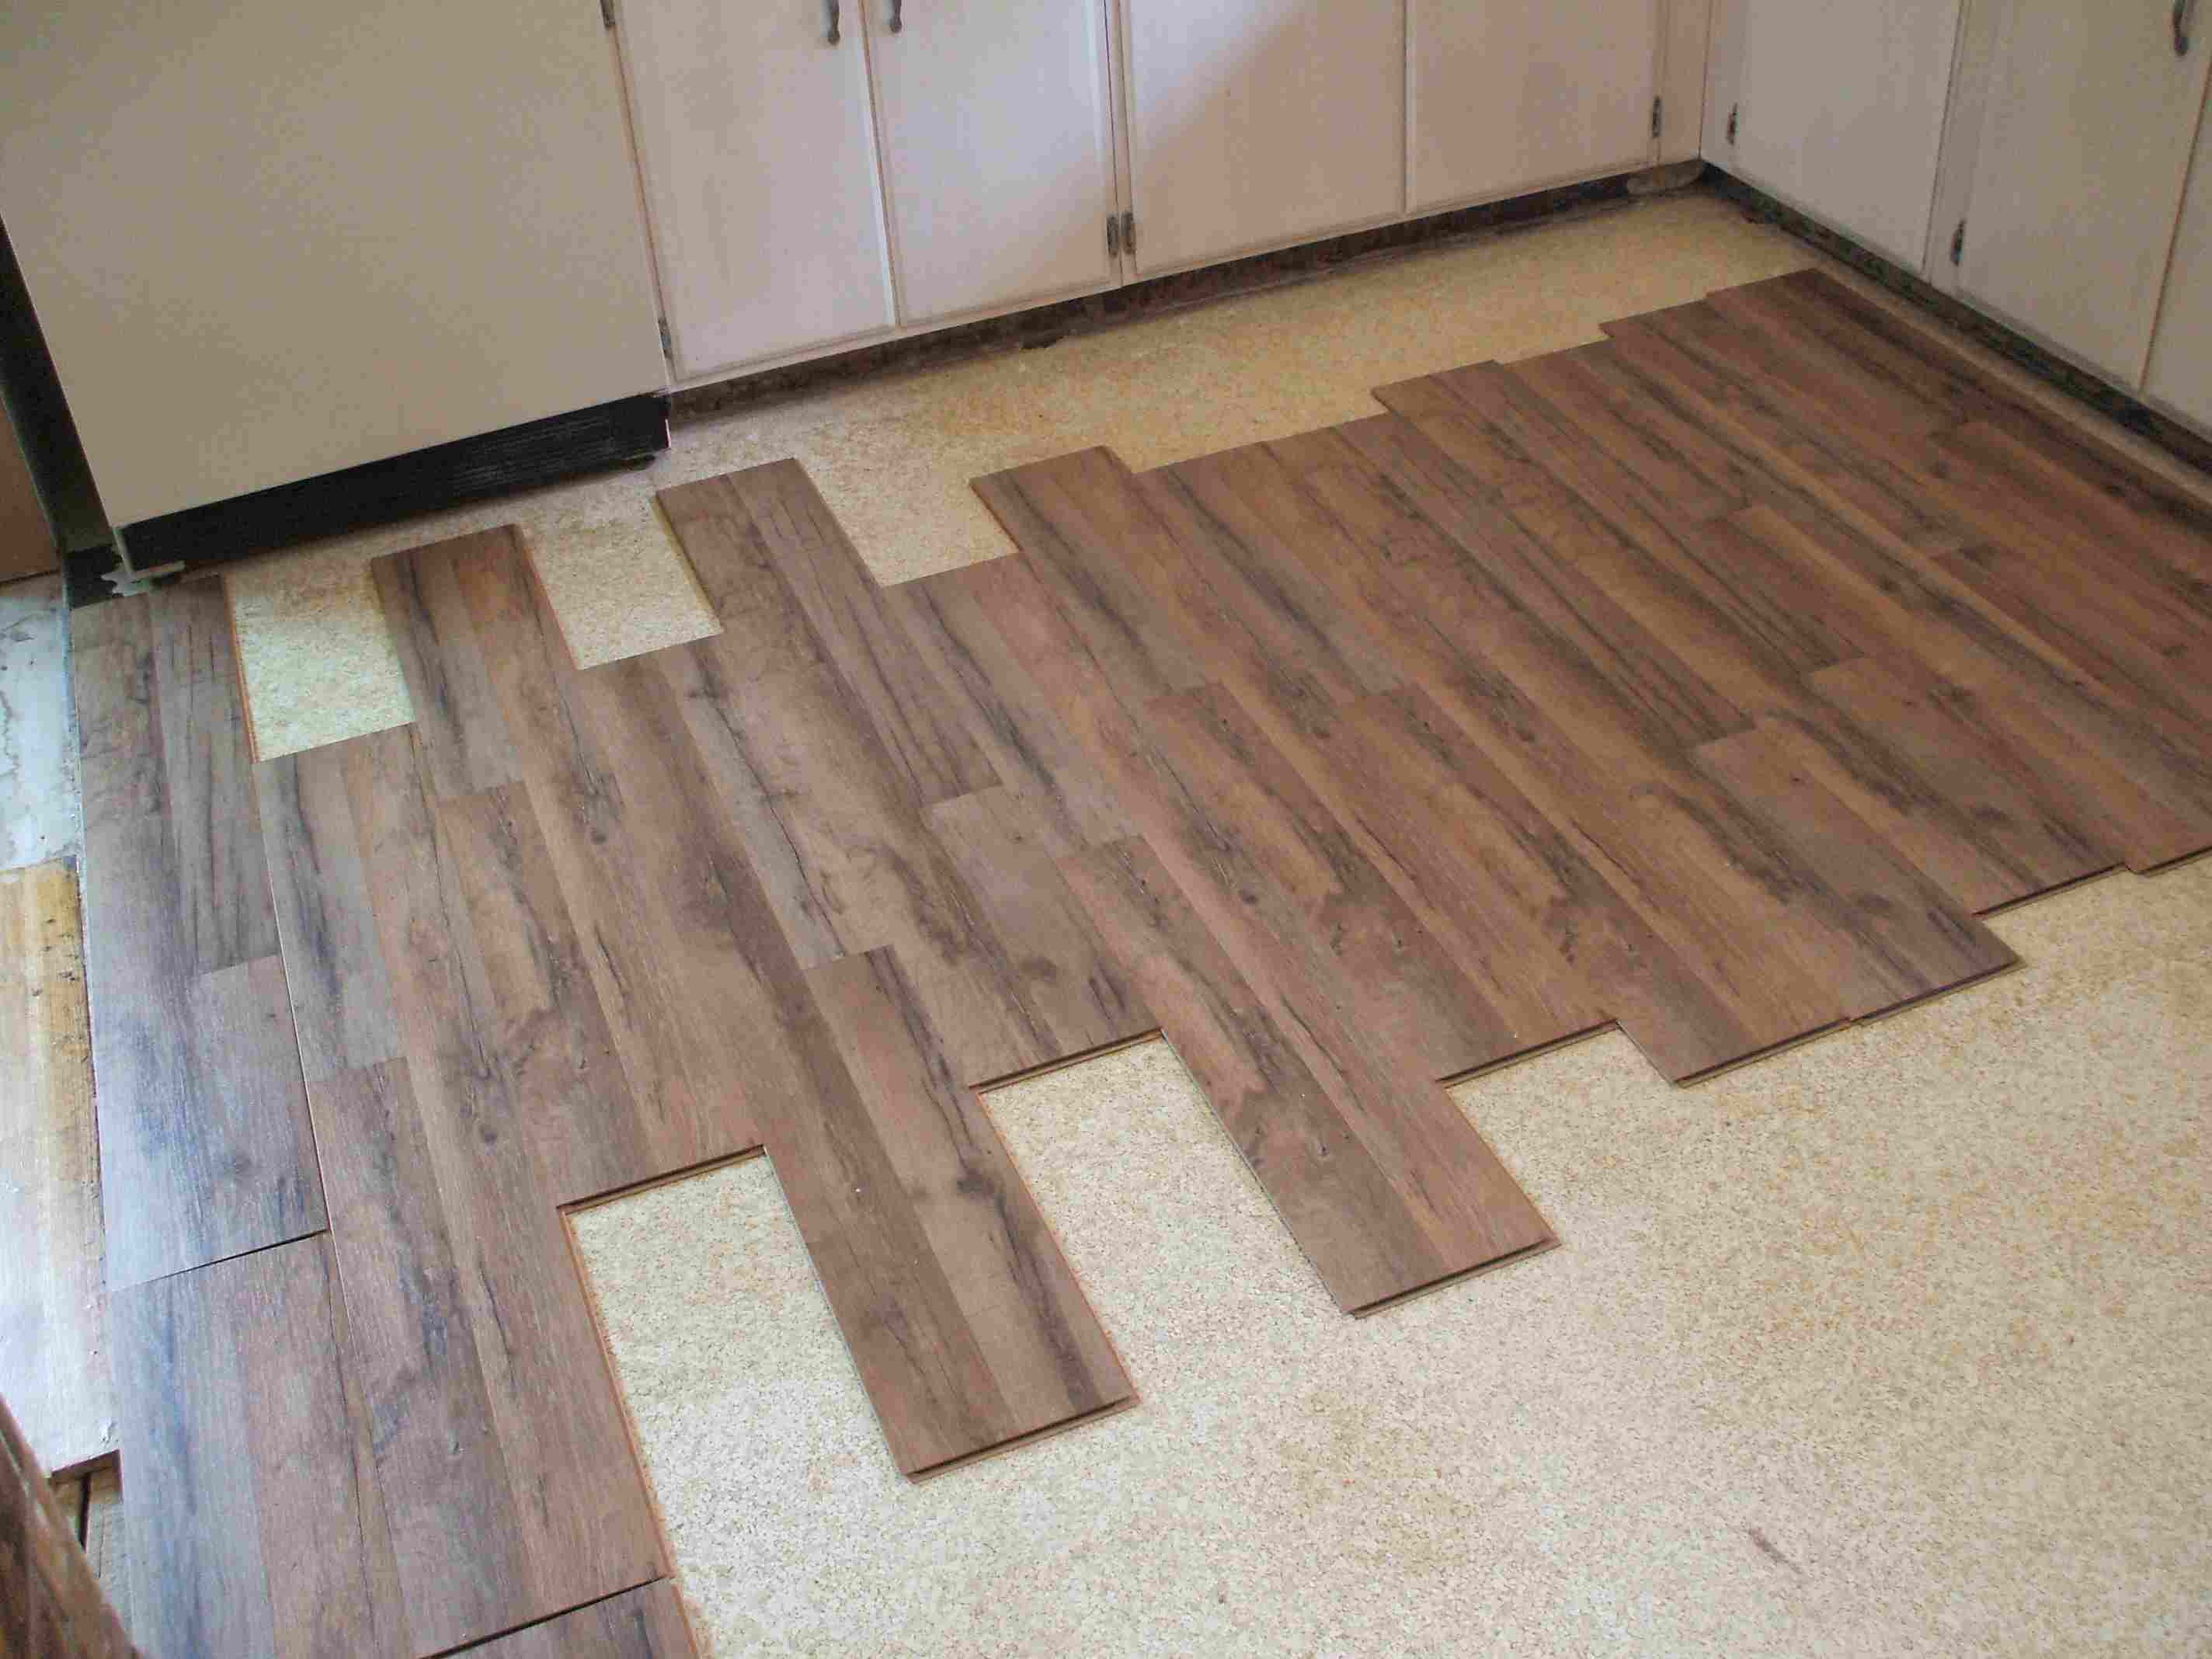 laying hardwood floors on concrete slab of laminate flooring installation made easy with installing laminate eyeballing layout 56a49d075f9b58b7d0d7d693 jpg